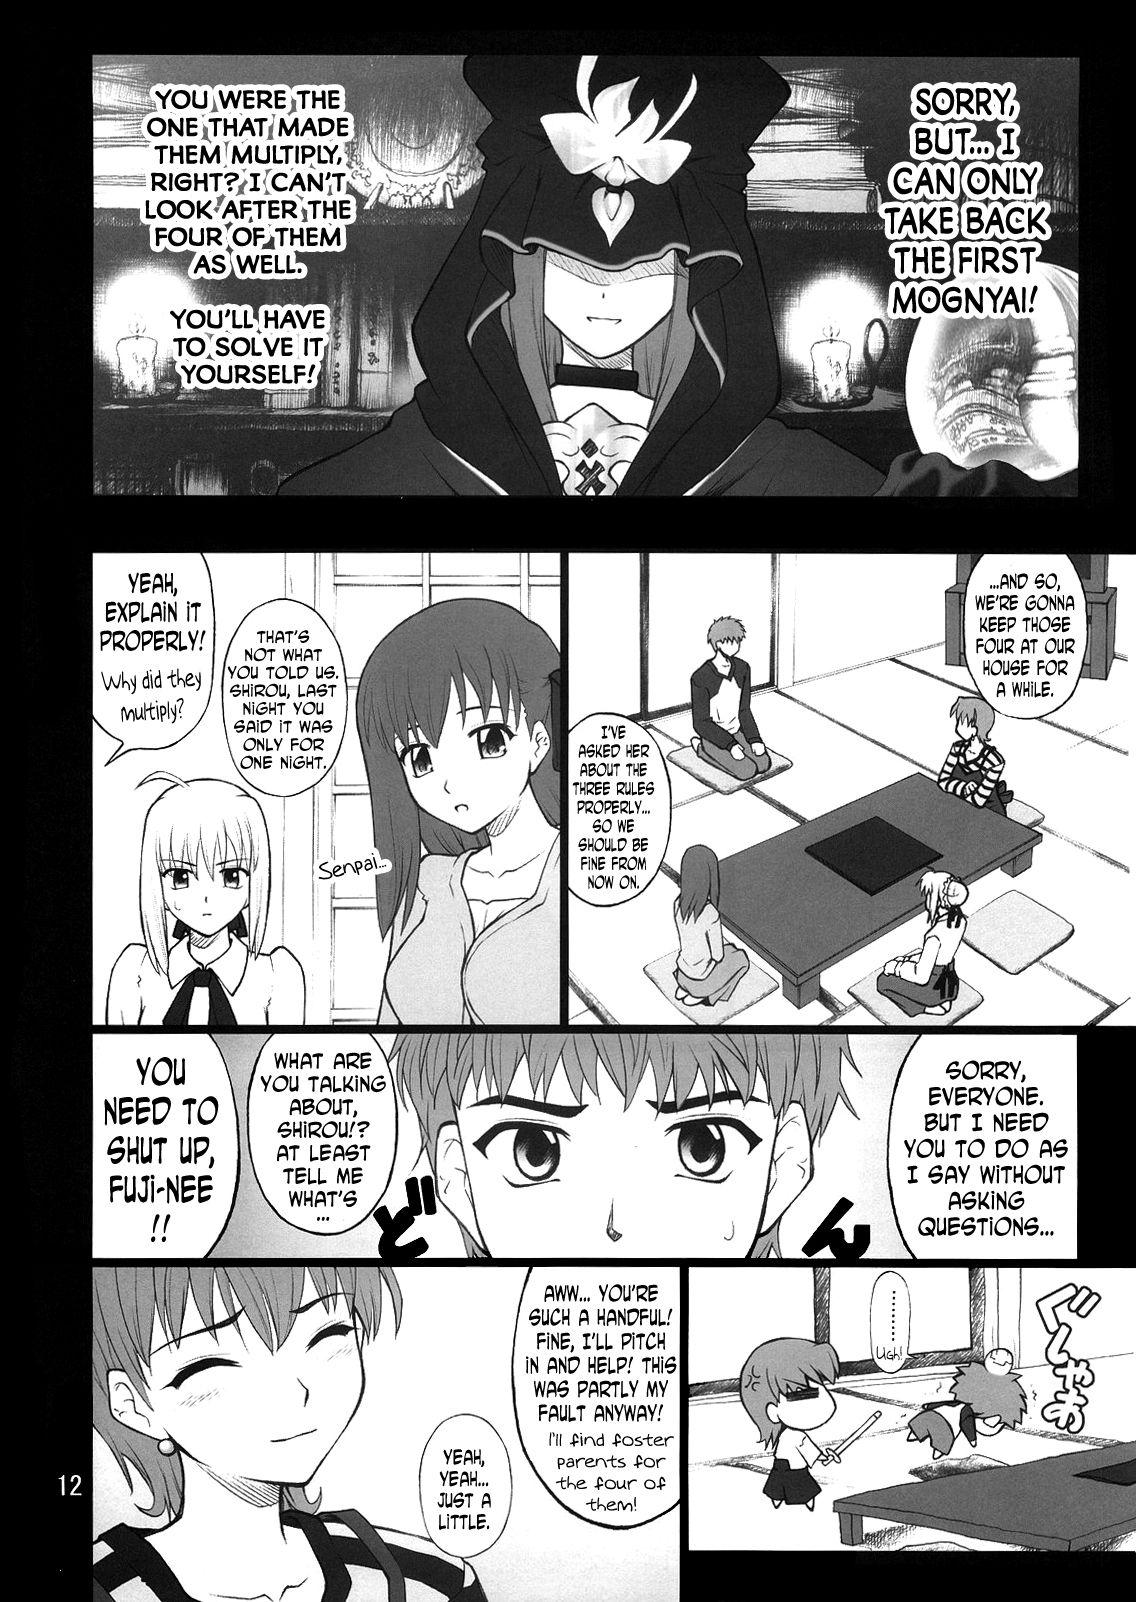 Boquete Grem-Rin 2 - Fate stay night Titties - Page 11